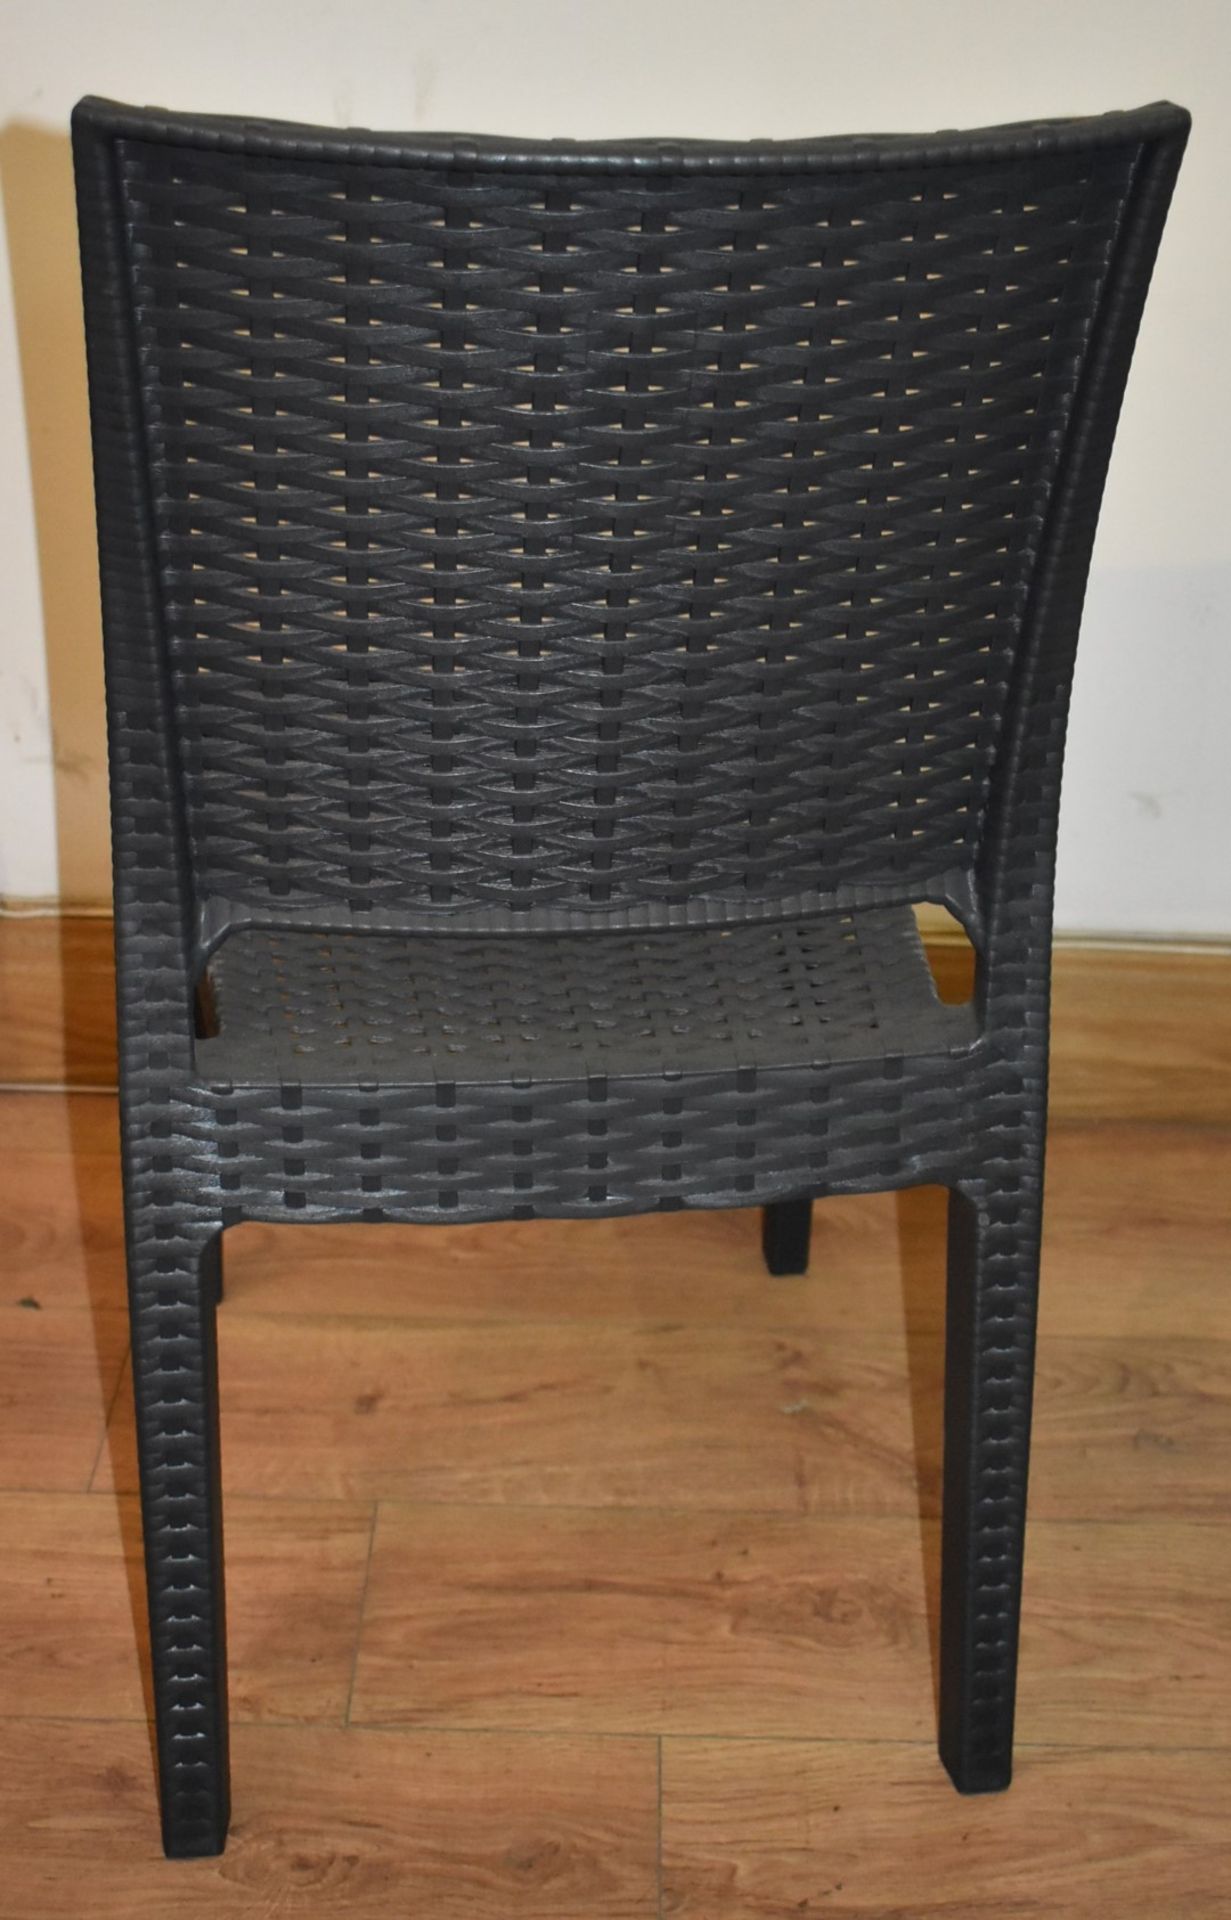 4 x Siesta 'Florida' Rattan Style Garden Chairs In Dark Grey - Suitable For Commercial or Home Use - - Image 8 of 21